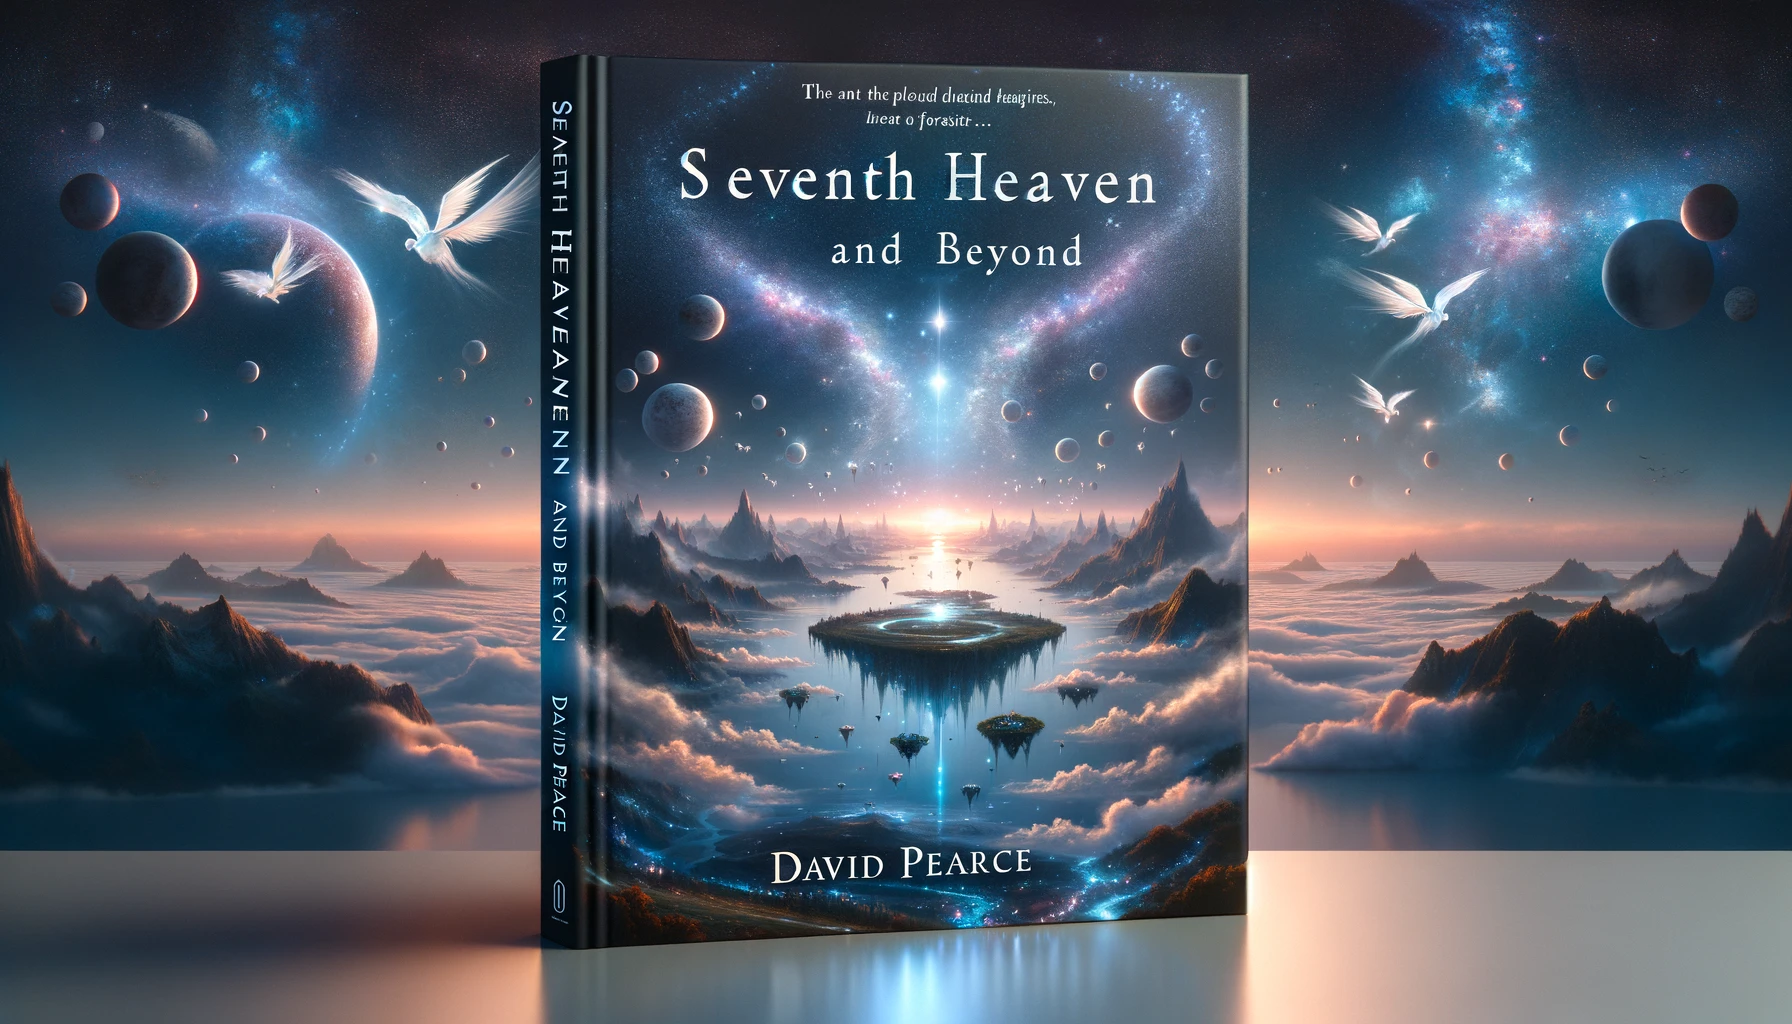 Seventh Heaven and Beyond by David Pearce